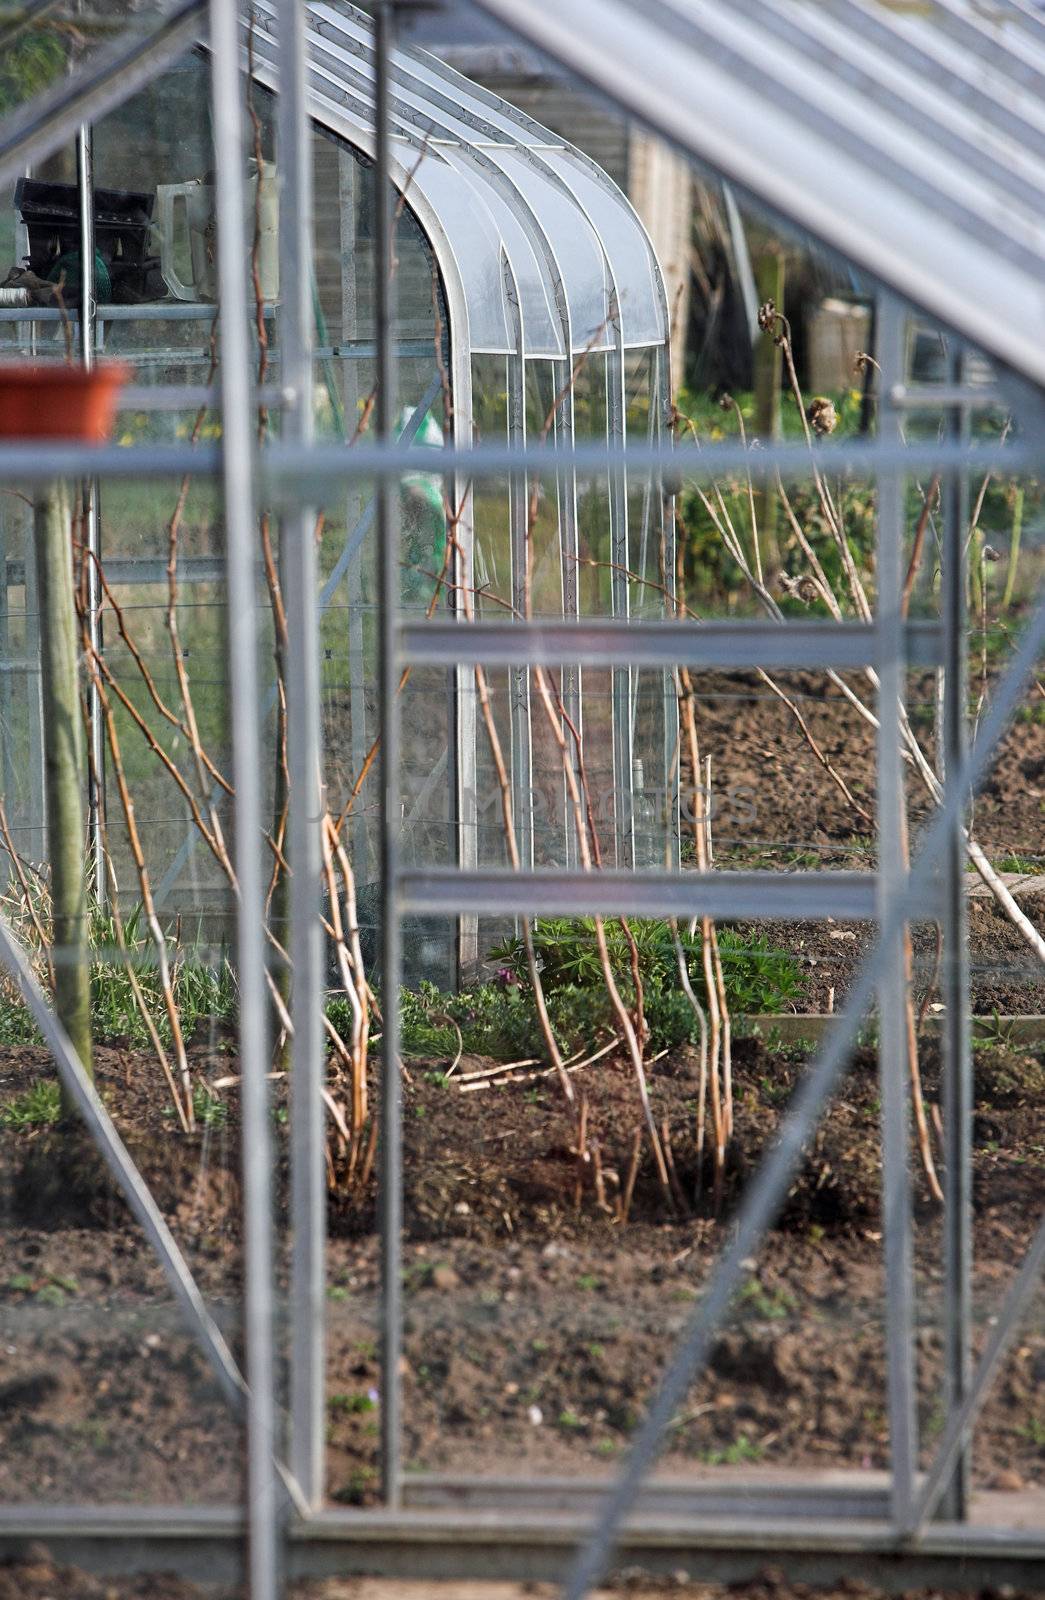 Glasshouses on an allotment, one seen through another